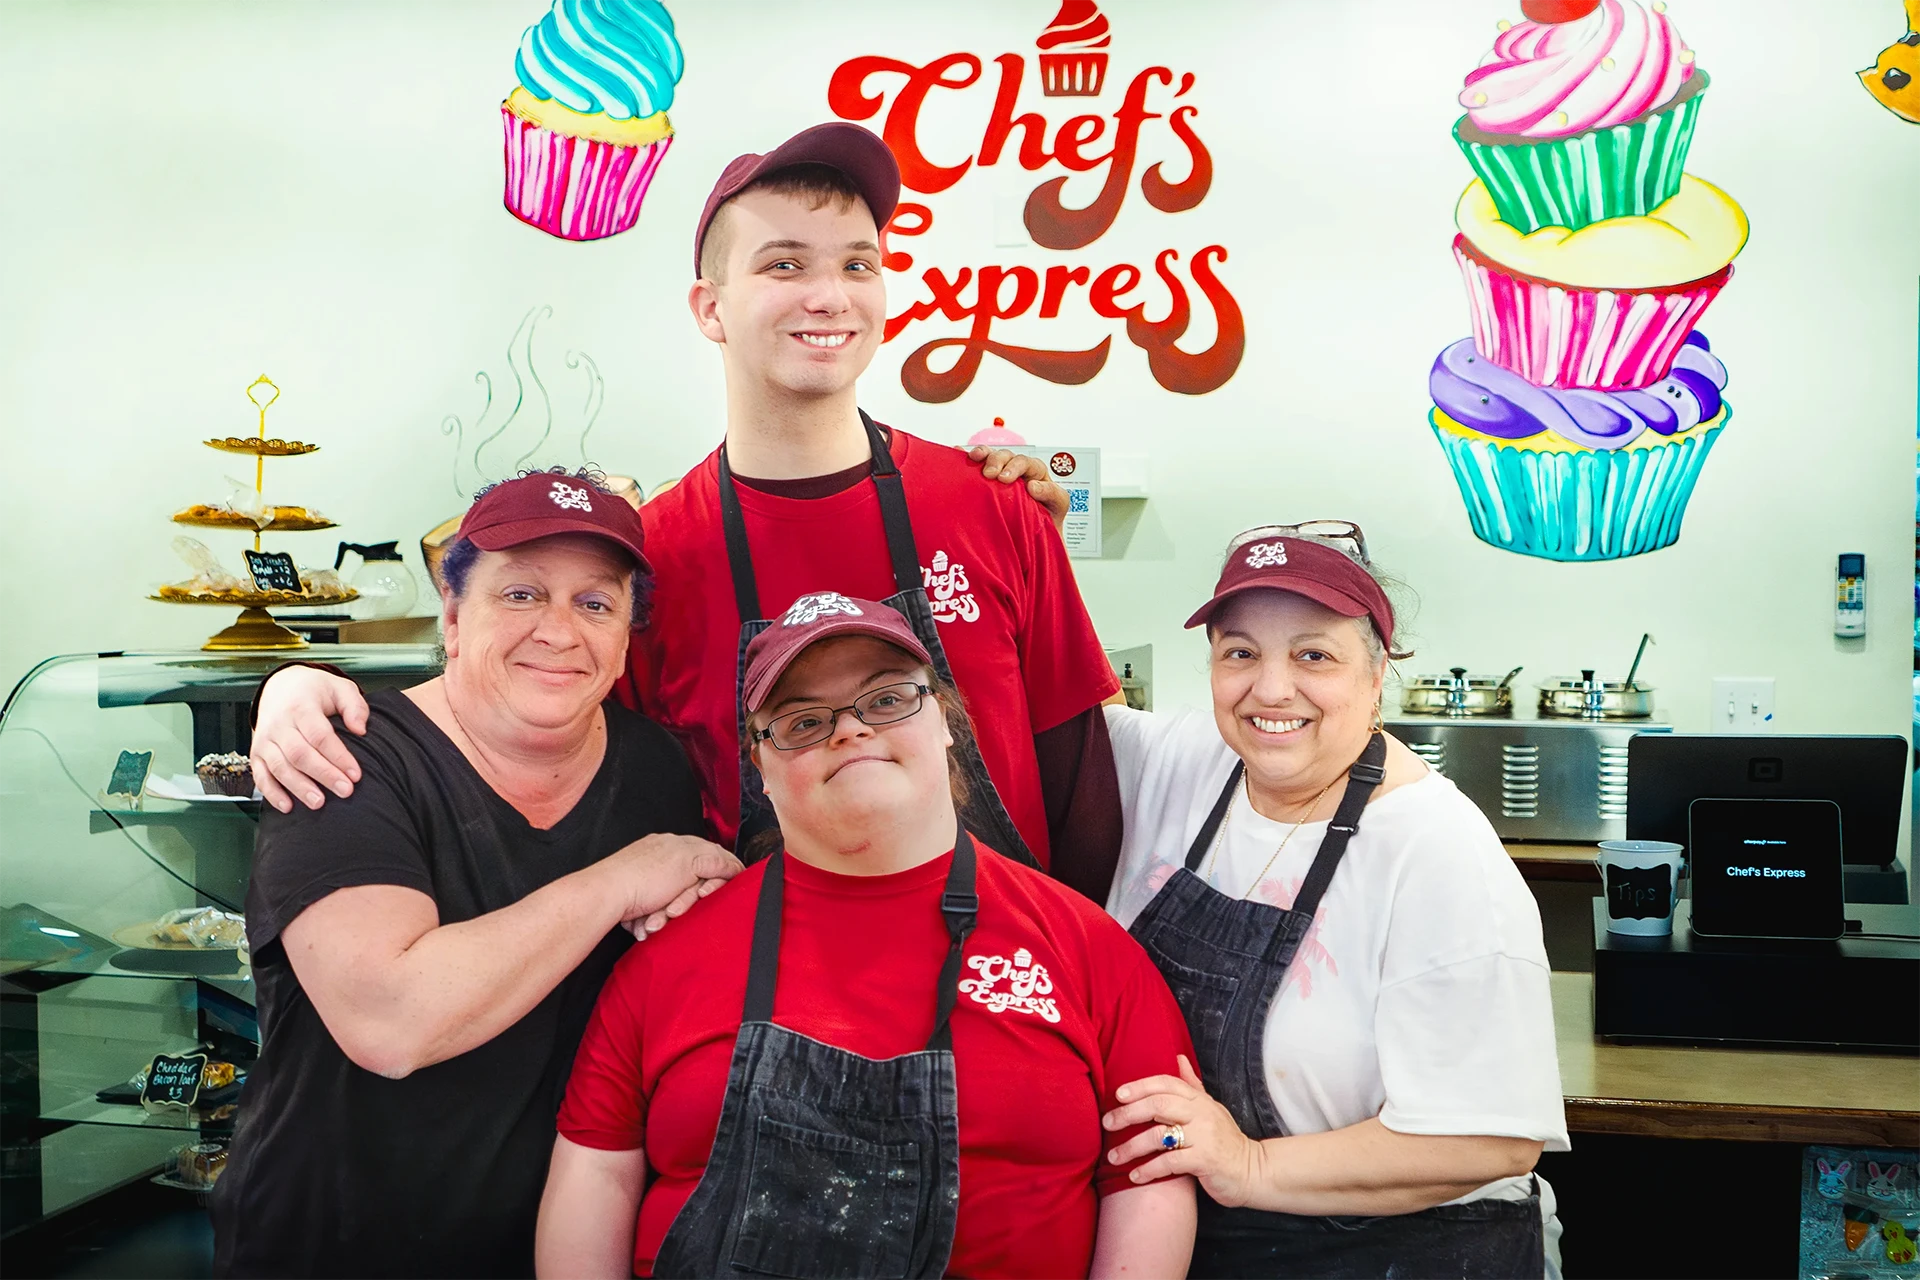 Chef’s Express background image